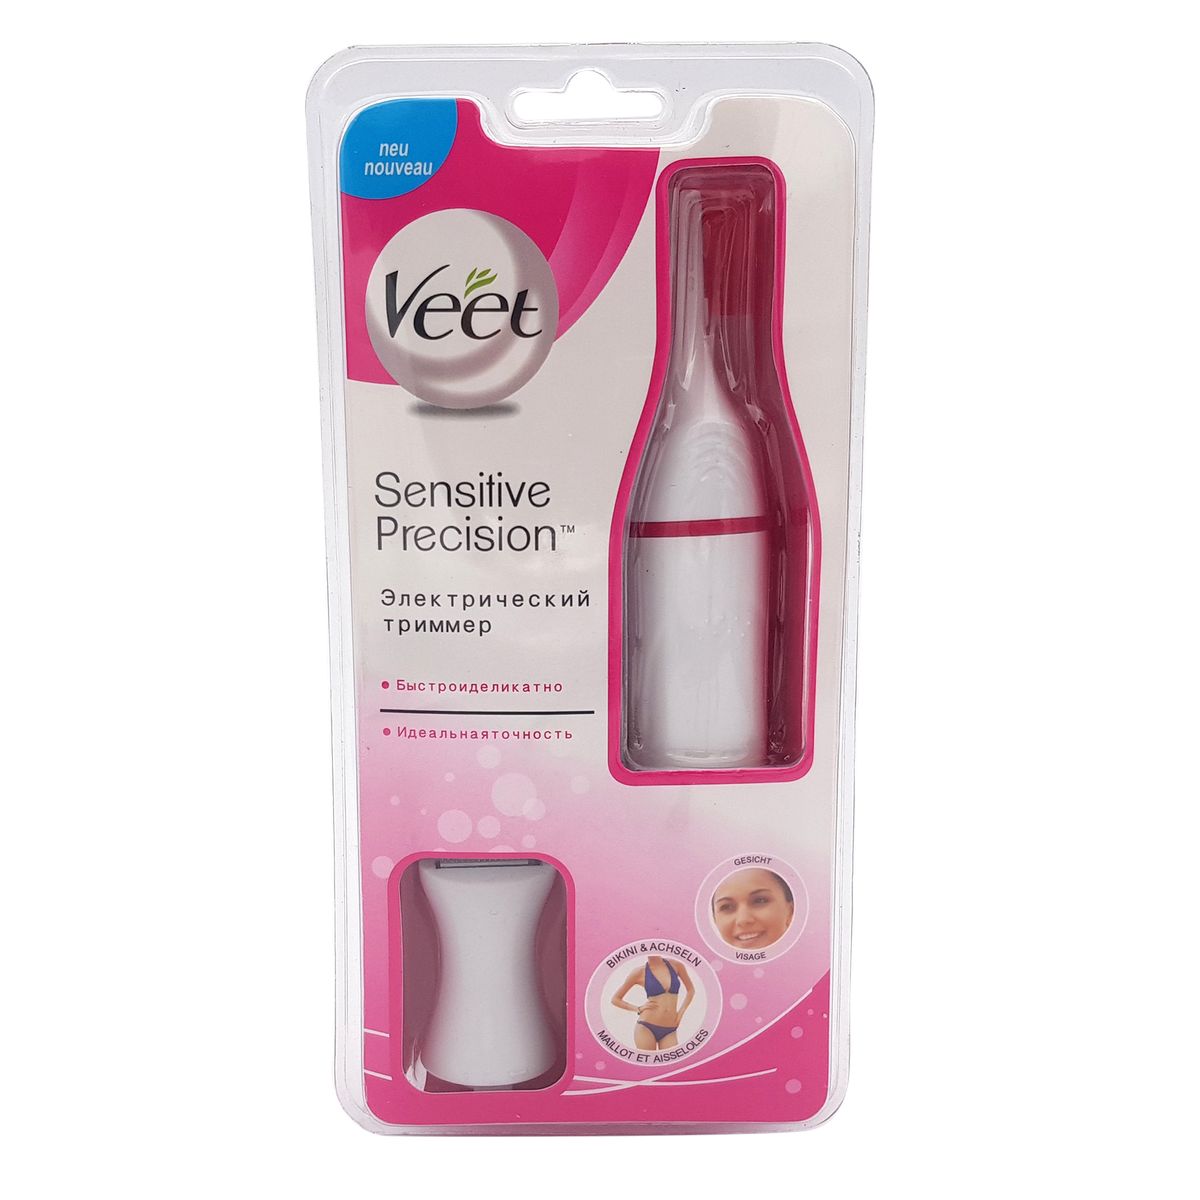 Veet Sensitive Precision Electric Trimmer (Parallel Import) | Buy Online in  South Africa 